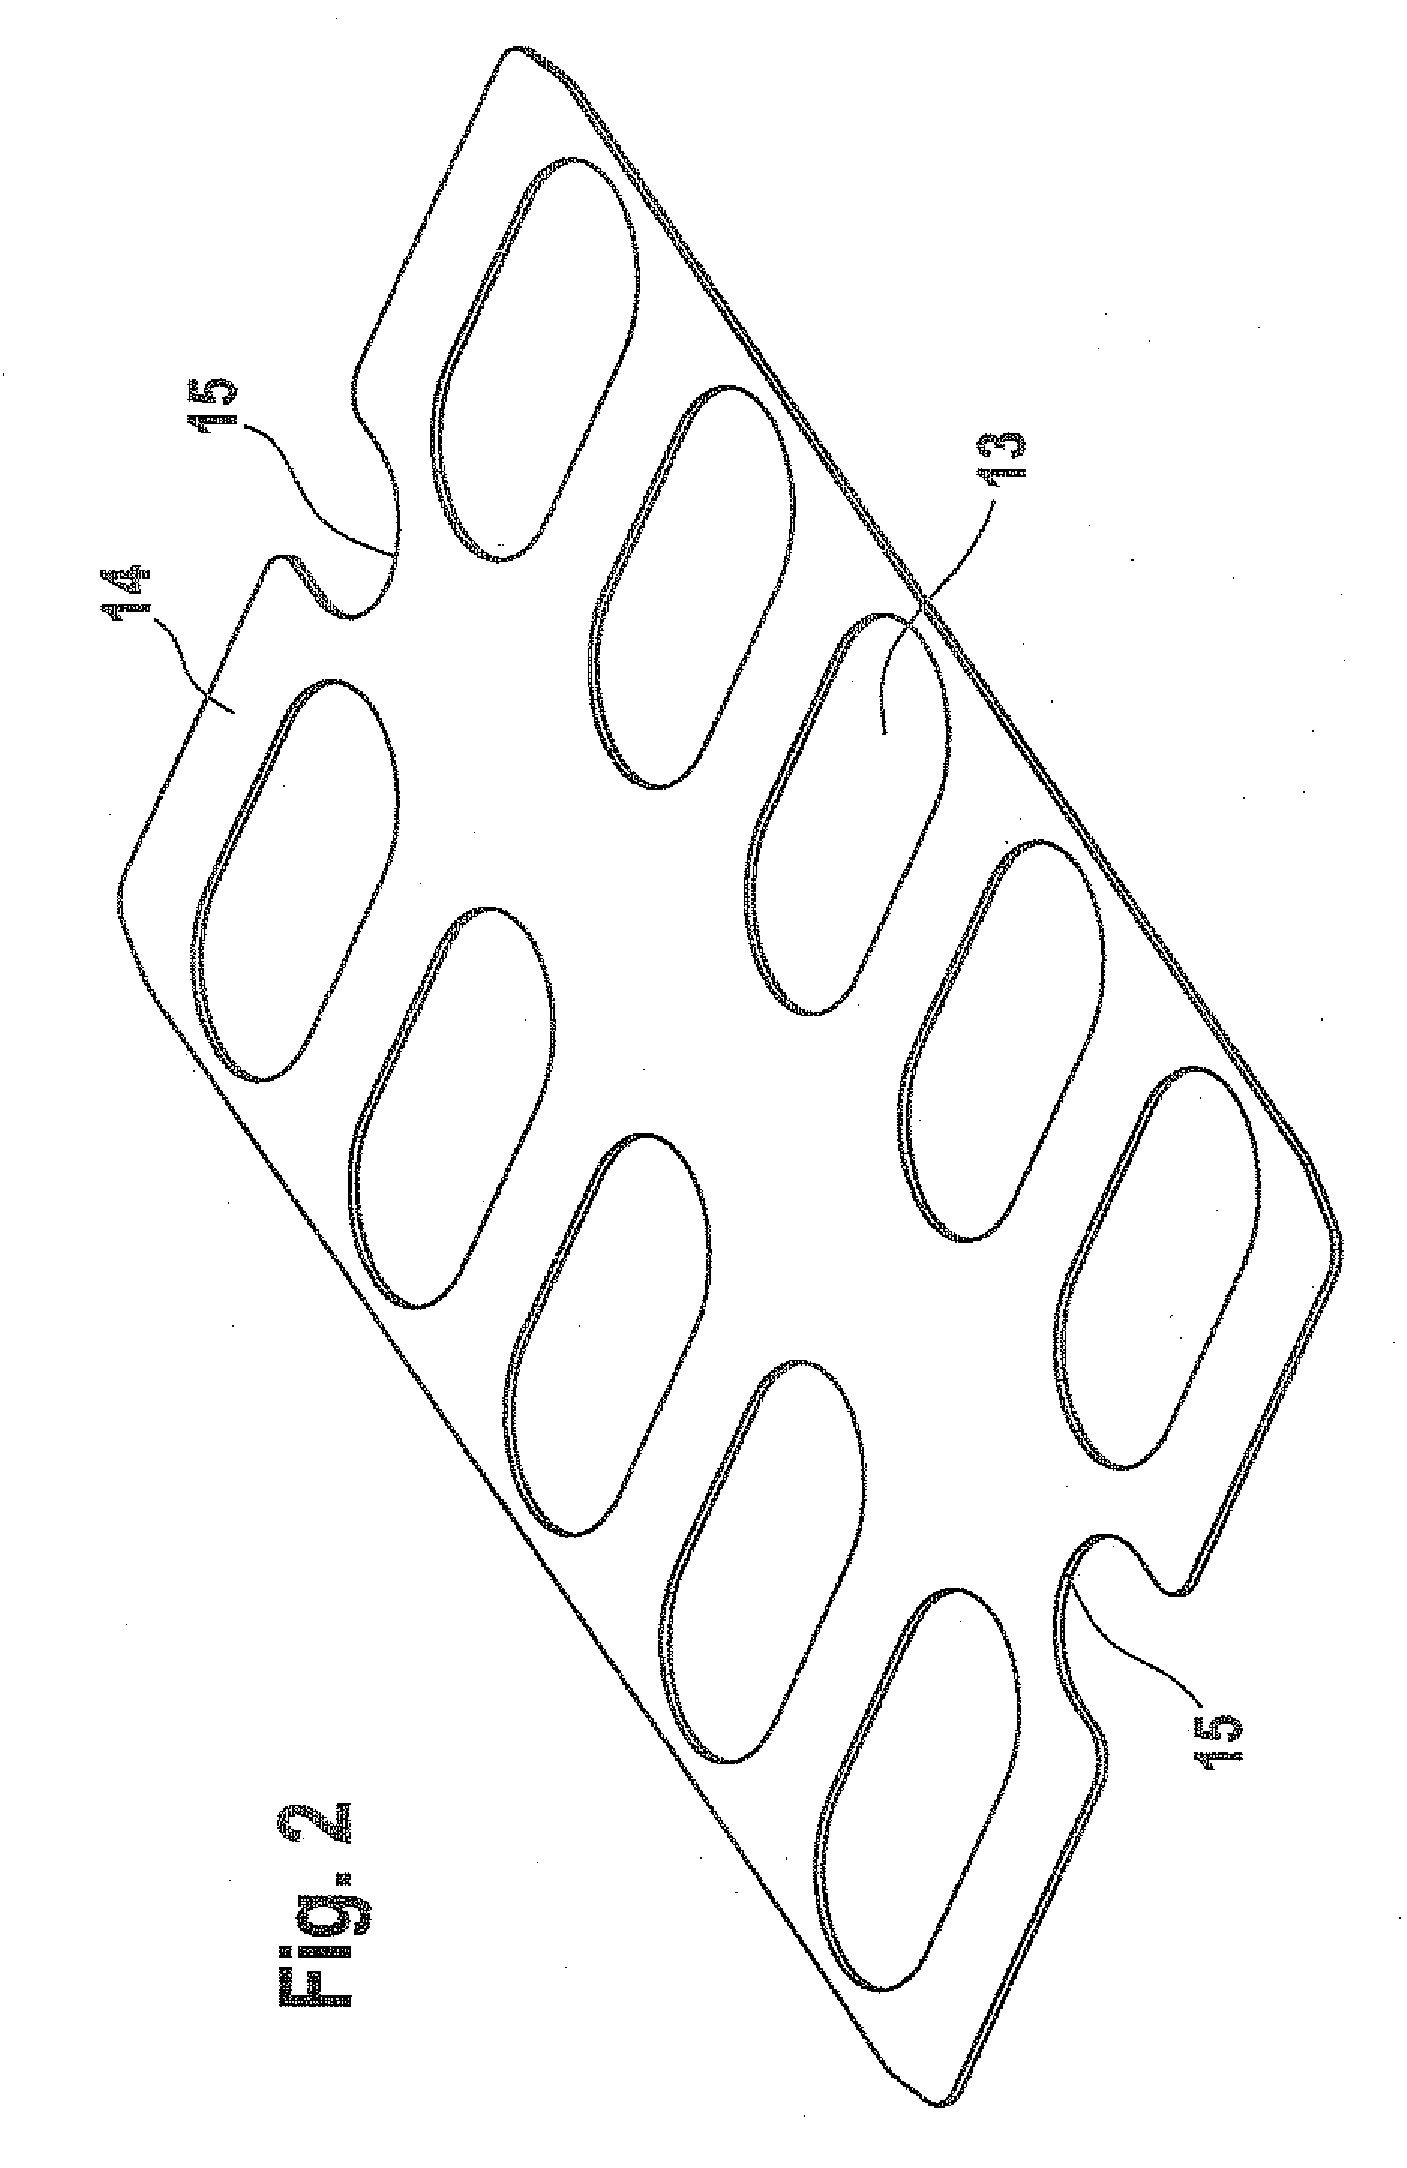 Device and method for reinforcing a blister